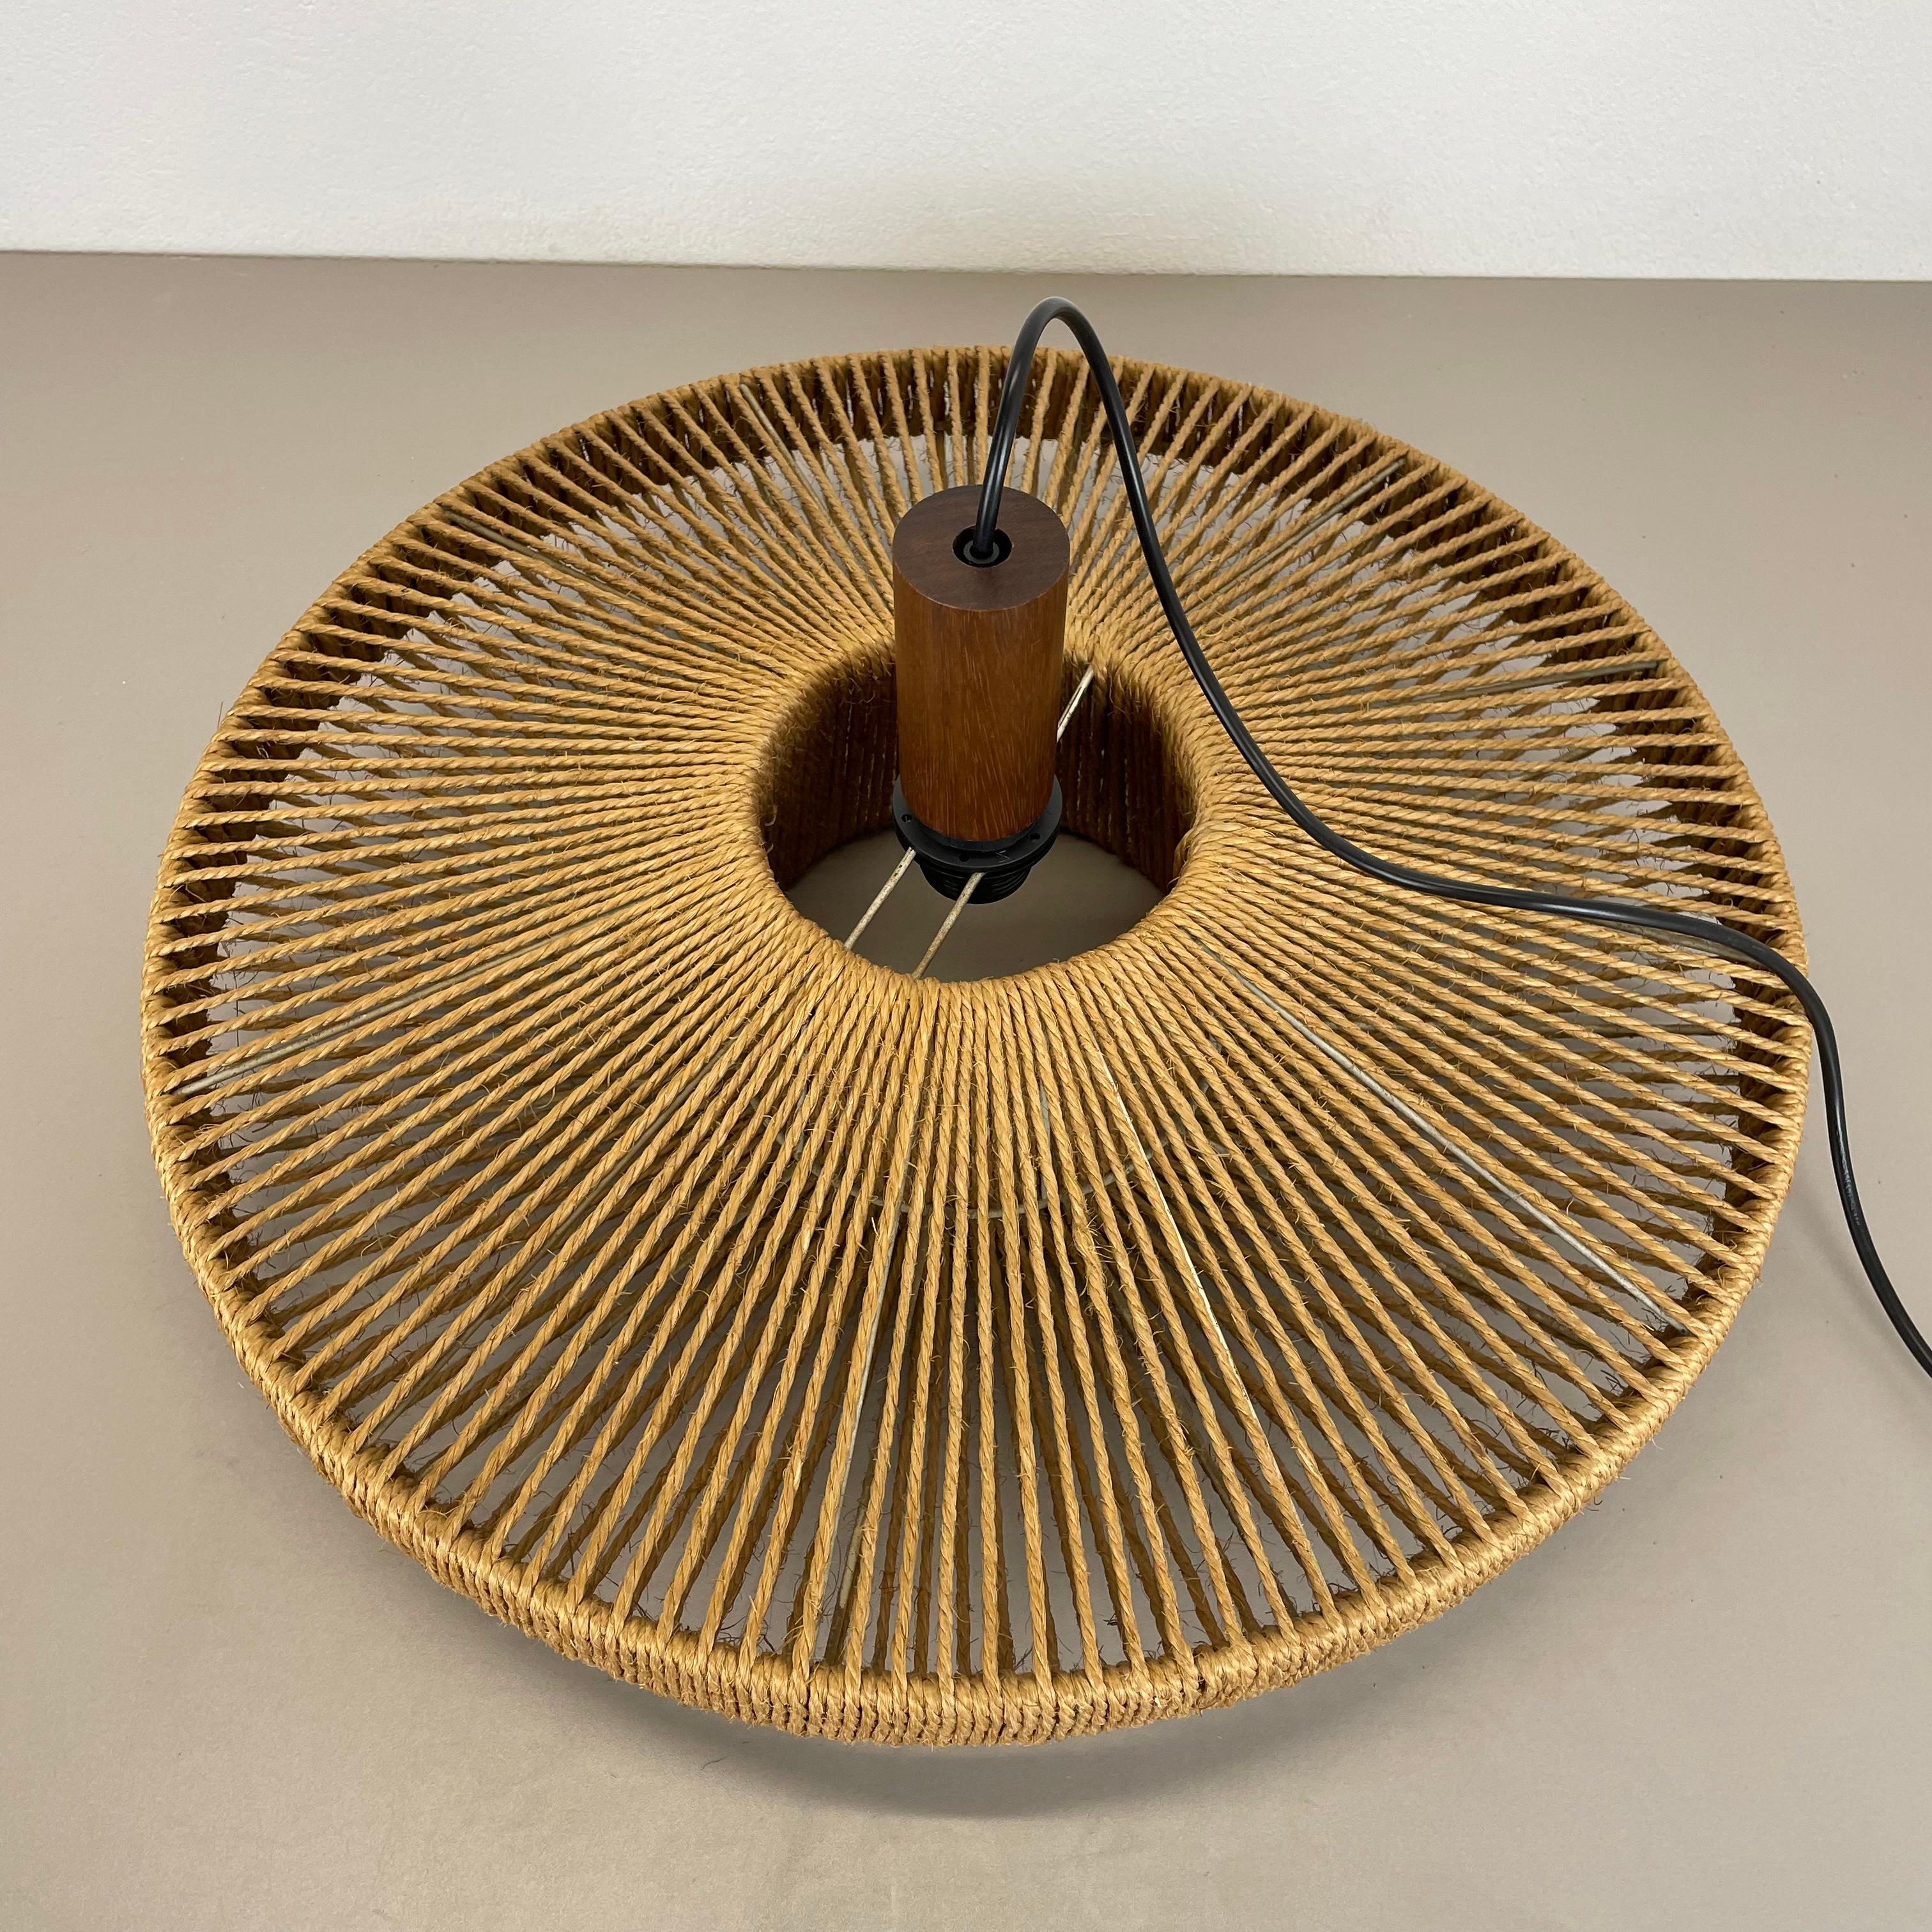 56cm Organic Sisal and Teak Ufo Hanging Light Made by Temde Lights Germany 1960s For Sale 9